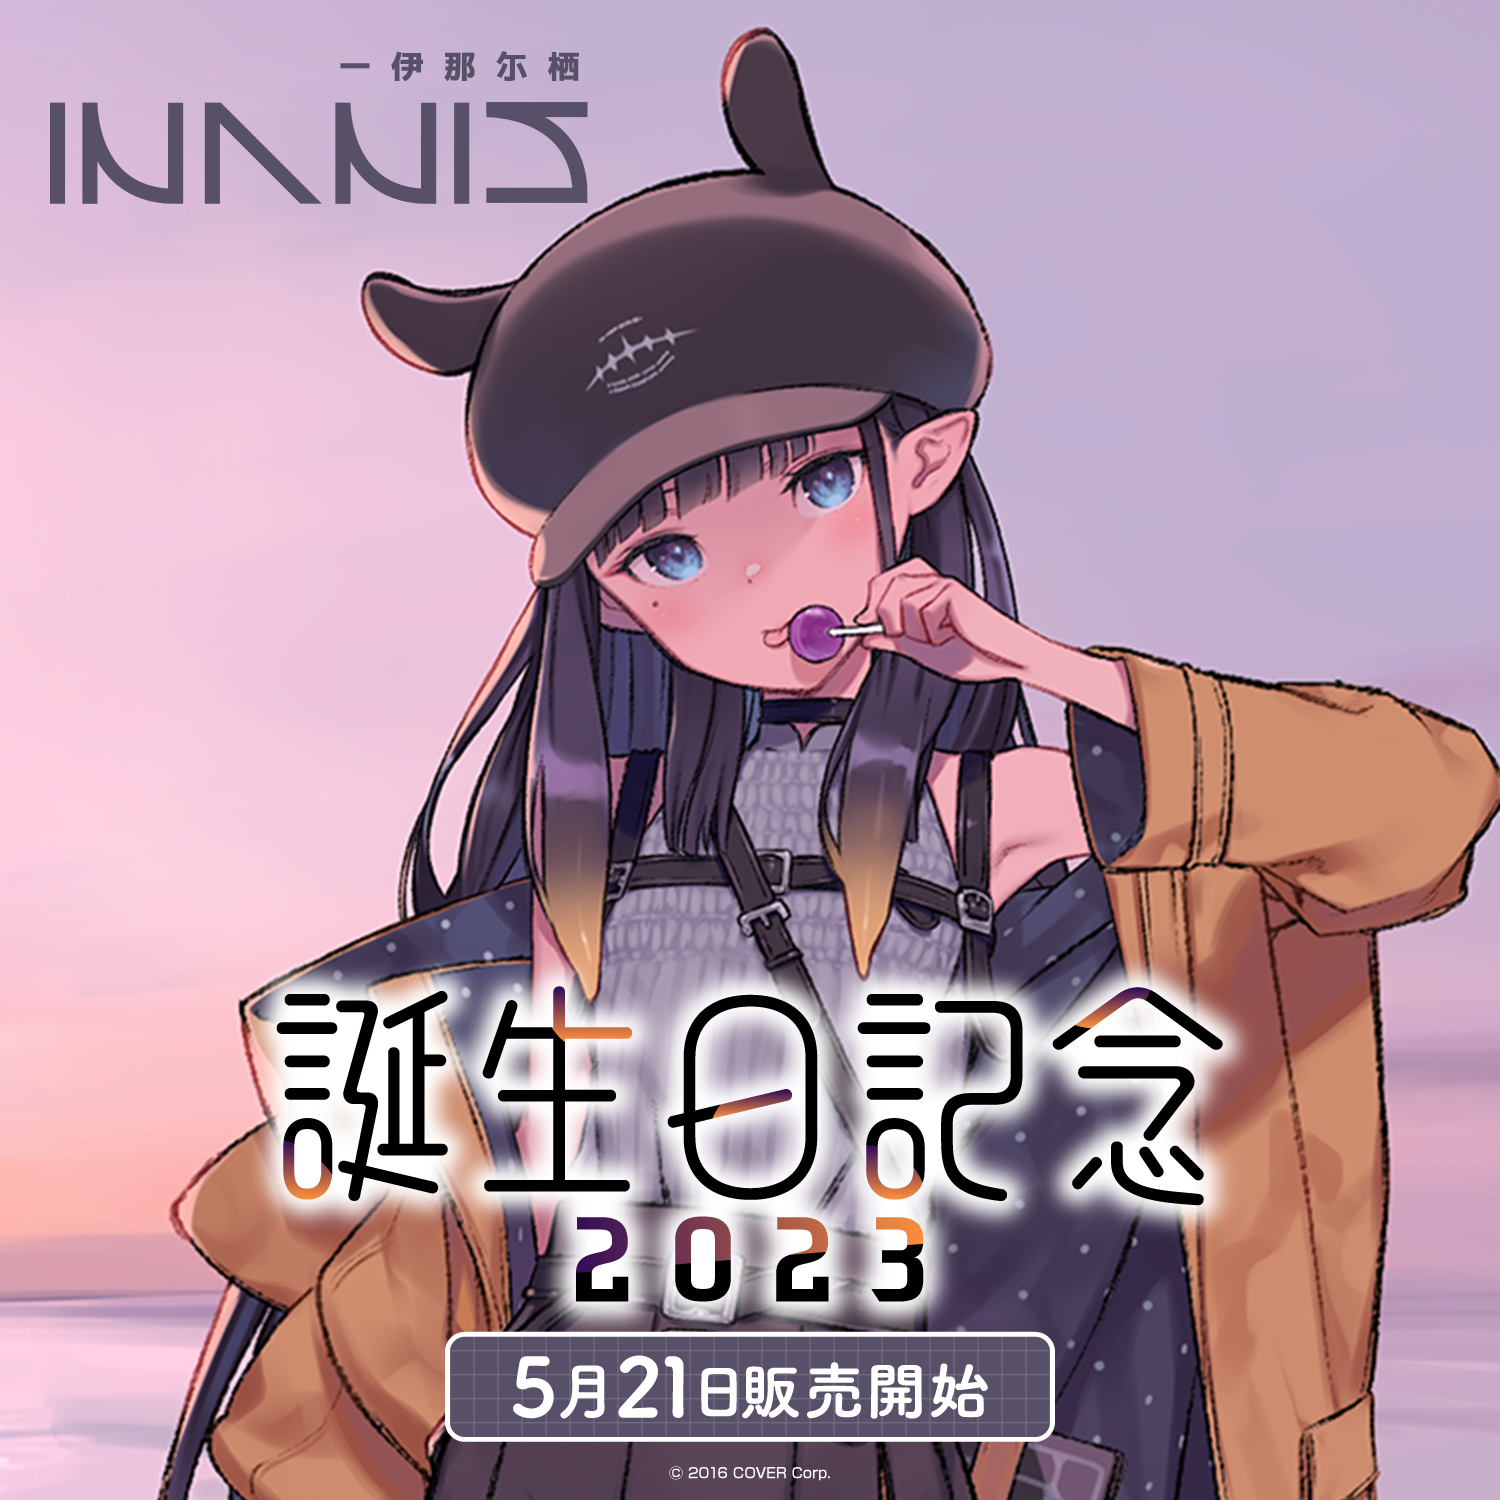 (Hololive)一伊那尓栖 誕生日記念2023 Limited　Inanisアクリルスマホスタンド